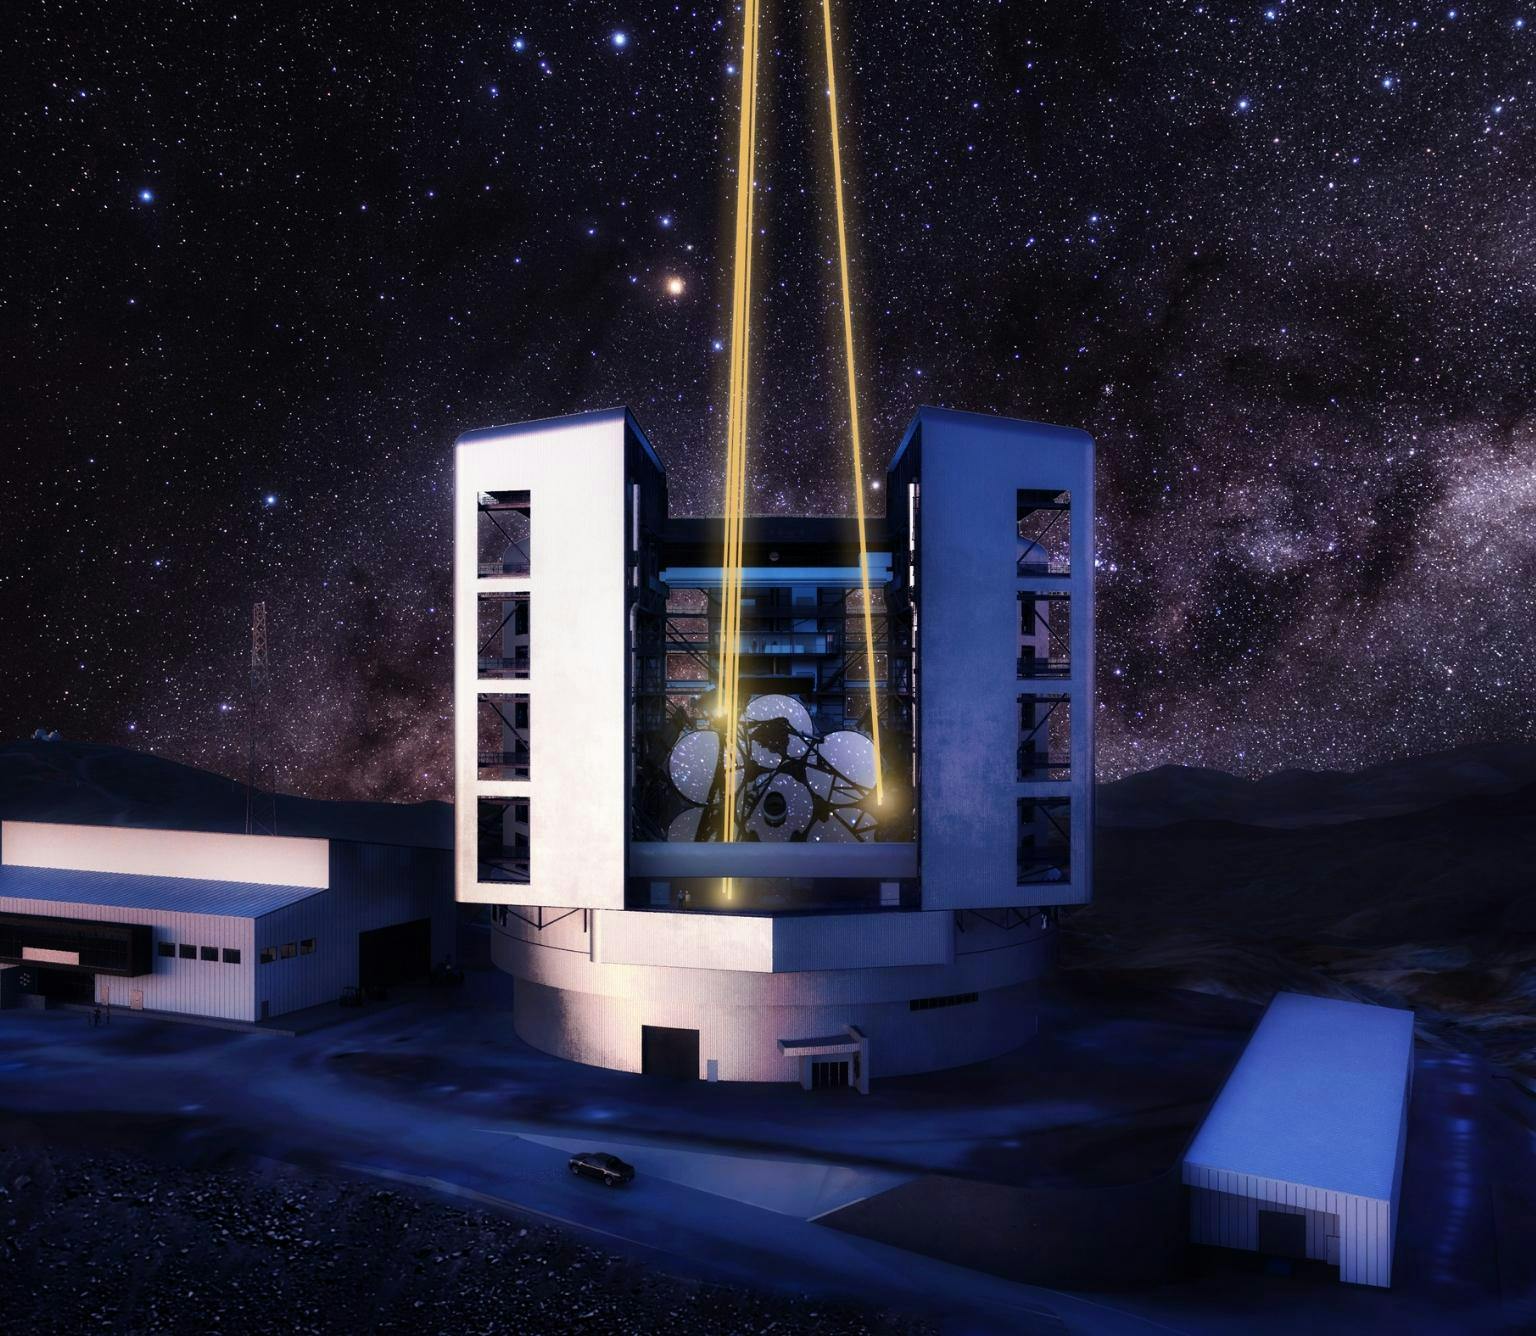 Artists illustration of the GMT telescope. The telescope is a large white structure with two yellow beams of light being emitted towards the sky from the telescope. The background shows the night sky filled with stars.